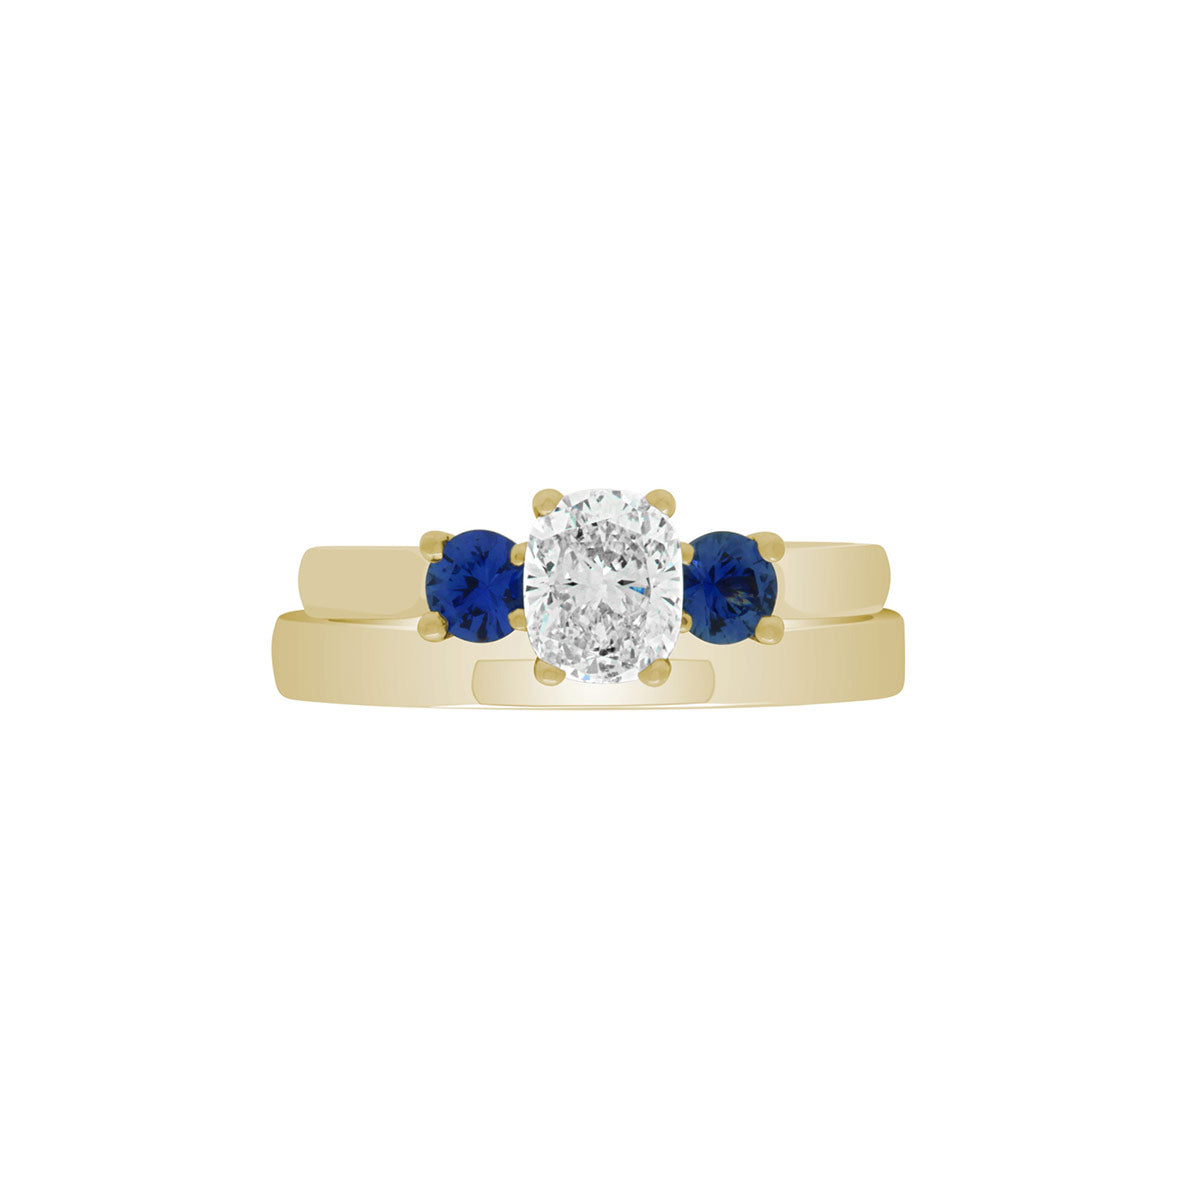 Diamond Sapphire Trilogy set in yellow gold metal with a matching yellow gold weddding ring